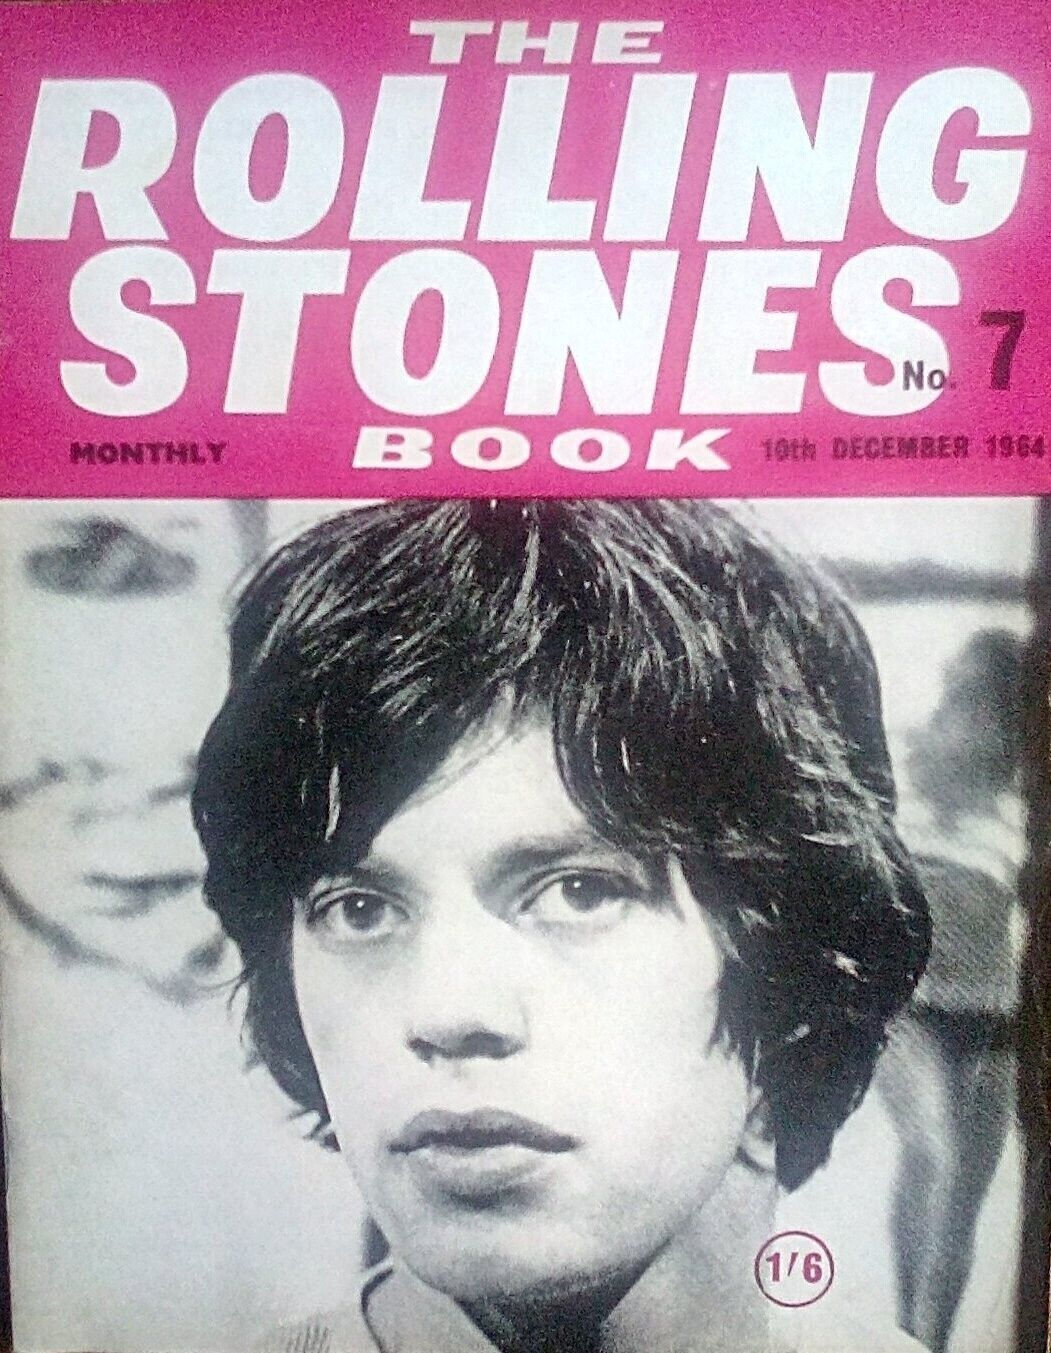 THE ROLLING STONES BOOK MONTHLY No.7 / 10th Dec.1964 Vintage Collectible V.GOOD